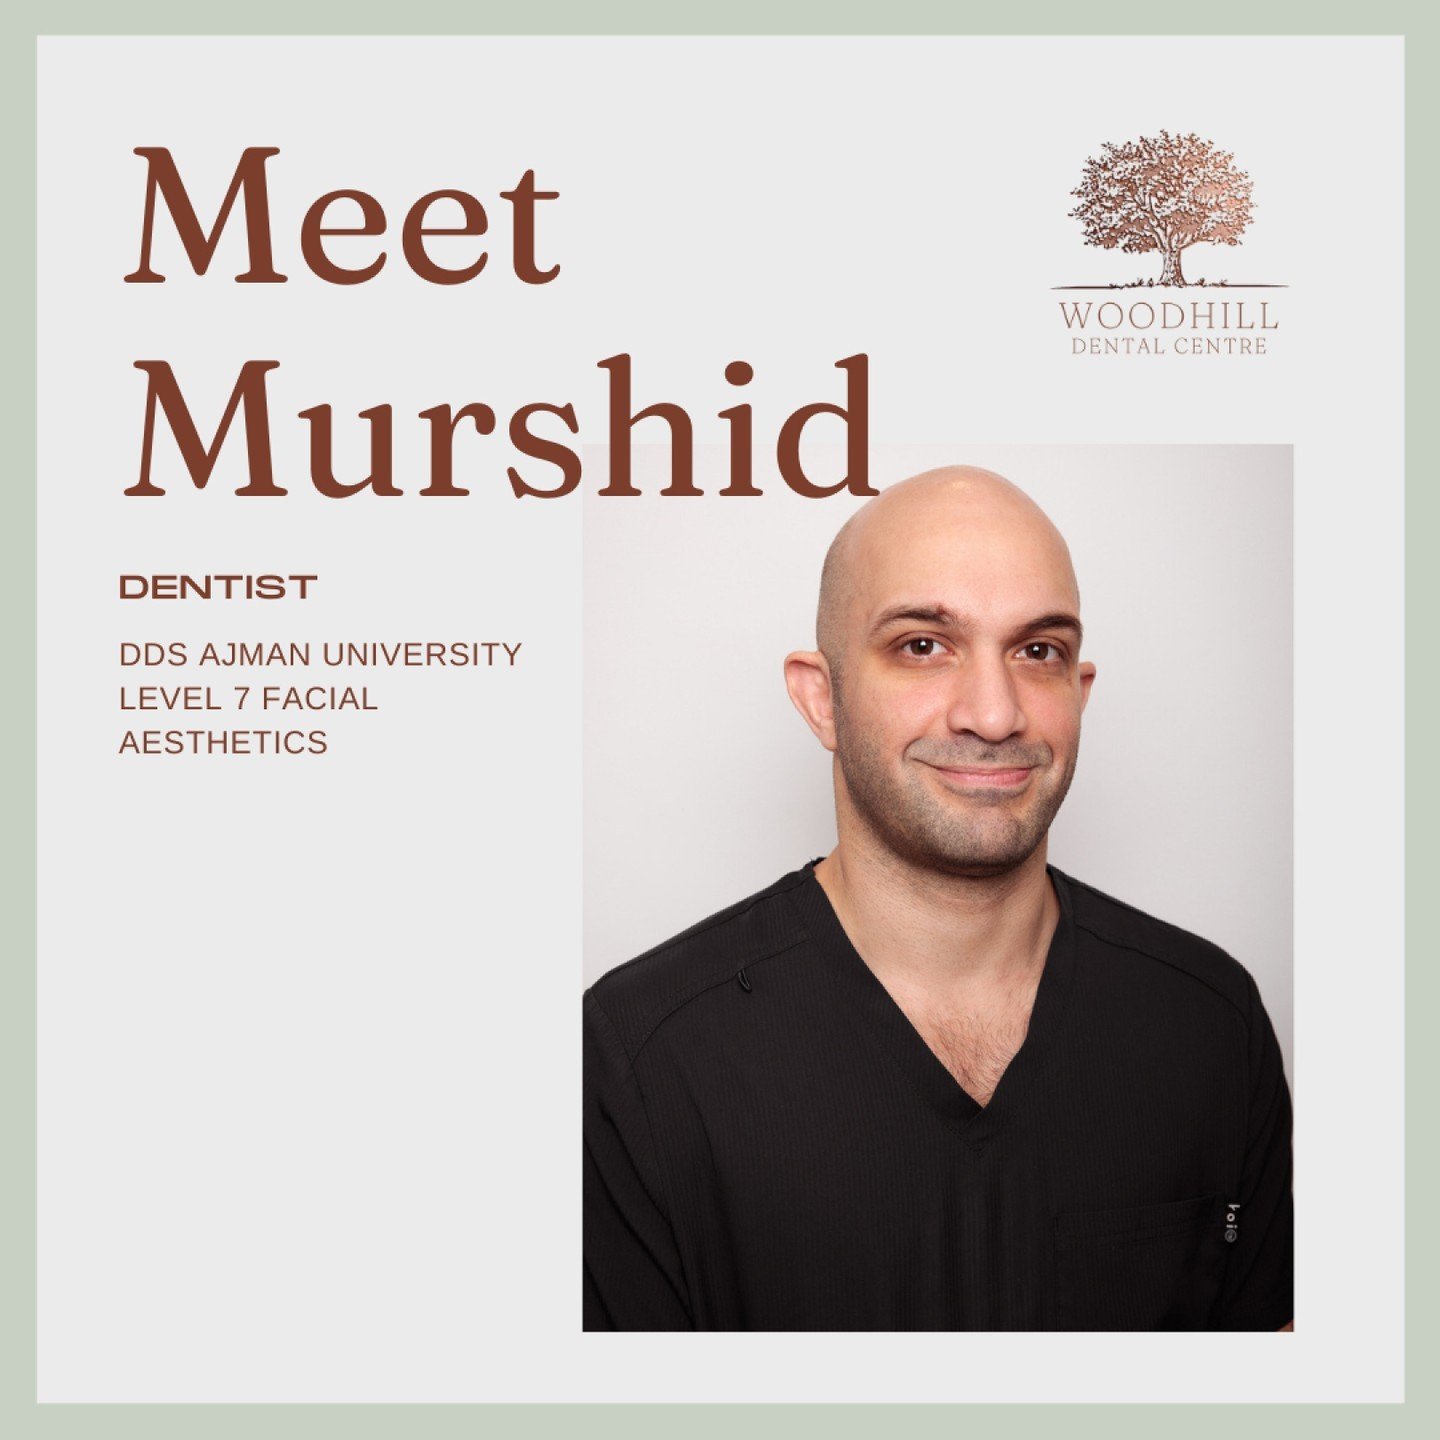 Meet The Team Monday - Introducing Murshid:

Murshid is a highly qualified dentist with a wealth of experience in the field. He graduated as a dentist in 2003 and has since pursued further studies, specialising in implant dentistry. He also holds a m